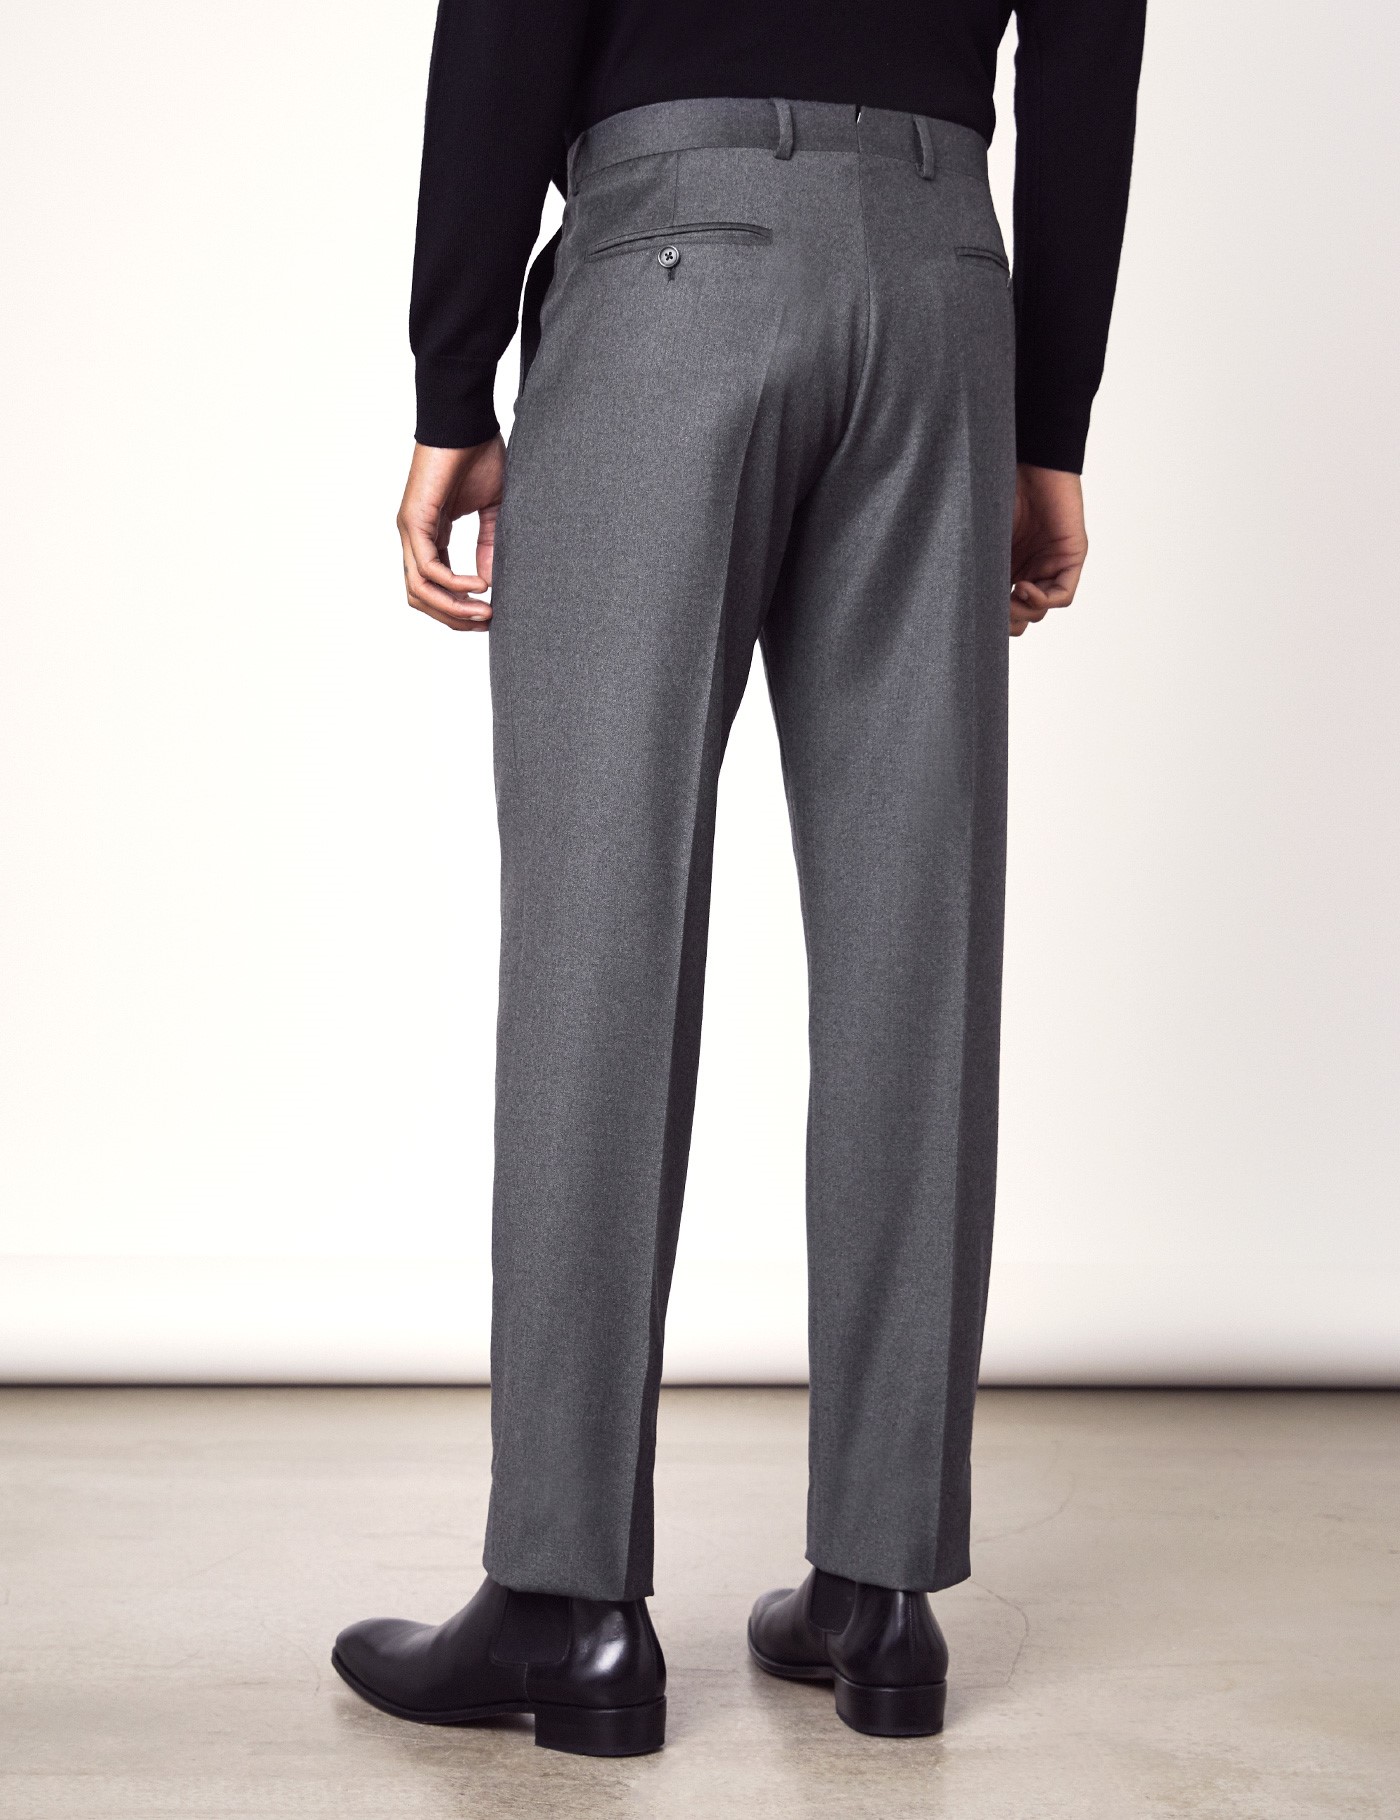 Men’s Charcoal Italian Flannel Trousers – 1913 Collection | Hawes & Curtis